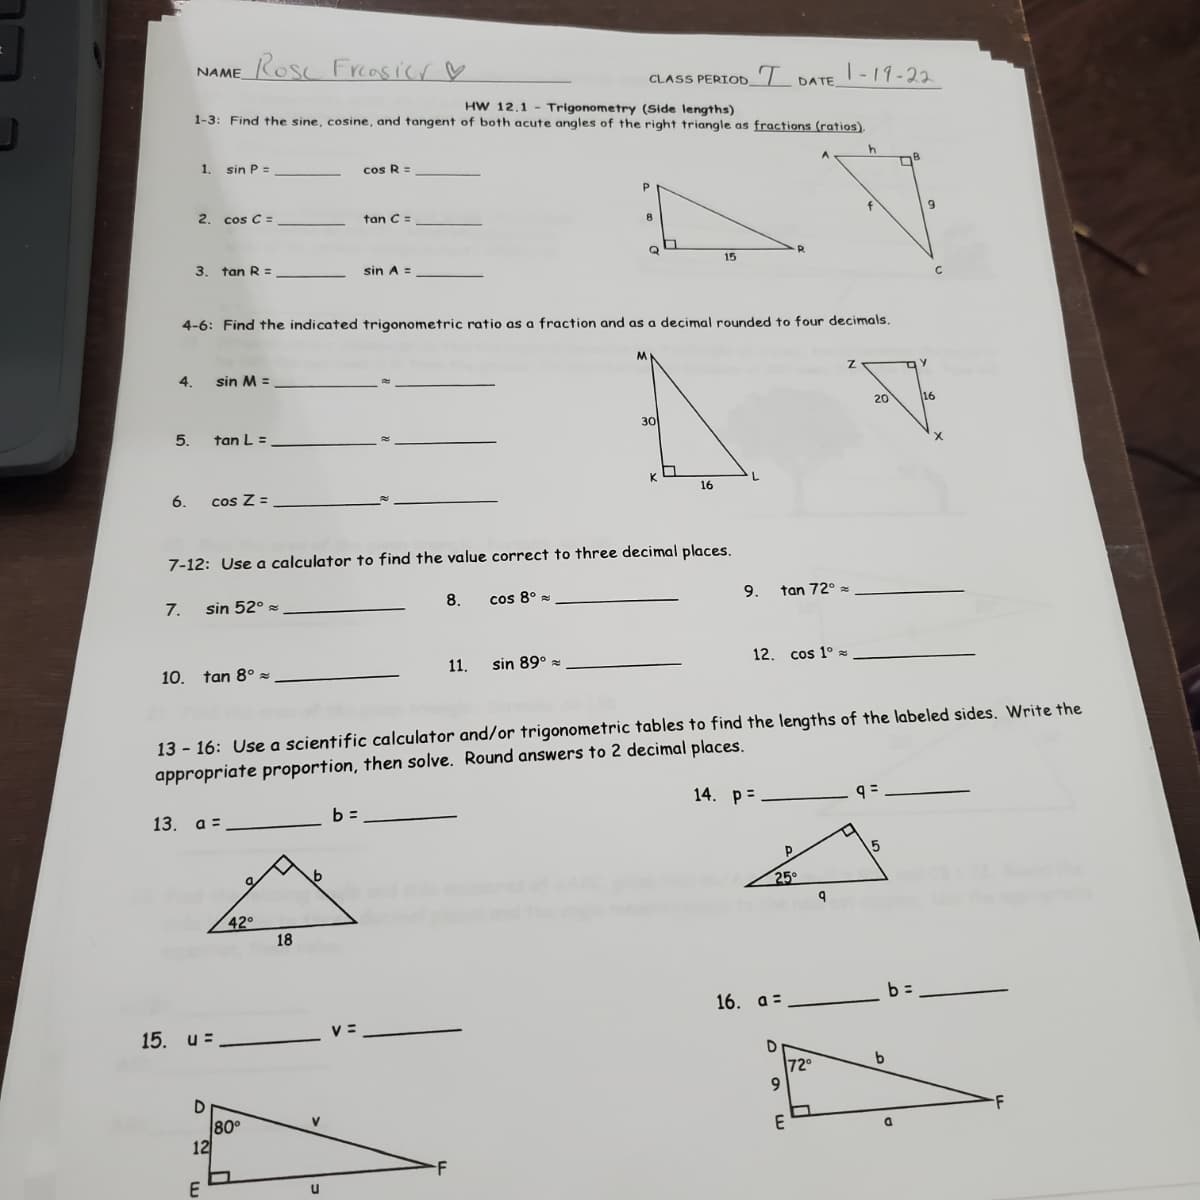 Rose Freasicr ♡
NAME
CLASS PERIOD_'l DATE -19-22
HW 12.1 - Trigonometry (Side lengths)
1-3: Find the sine, cosine, and tangent of both acute angles of the right triangle as fractions (ratios).
1.
sin P=
cos R =
2. cos C =
tan C =
Q
3.
tan R =
sin A =
15
4-6: Find the indicated trigonometric ratio as a fraction and as a decimal rounded to four decimals.
4.
sin M =
20
16
30
5.
tan L =
6.
cos Z =
16
7-12: Use a calculator to find the value correct to three decimal places.
7.
sin 52° :
8.
cos 8° =
9.
tan 72°
10. tan 8° z
11.
sin 89°
12.
cos 1° s
13 - 16: Use a scientific calculator and/or trigonometric tables to find the lengths of the labeled sides. Write the
appropriate proportion, then solve. Round answers to 2 decimal places.
14. р-
13. а%3
b =
25
42°
18
16. a=
15. и%3
V =
72°
-F
80°
12
E
